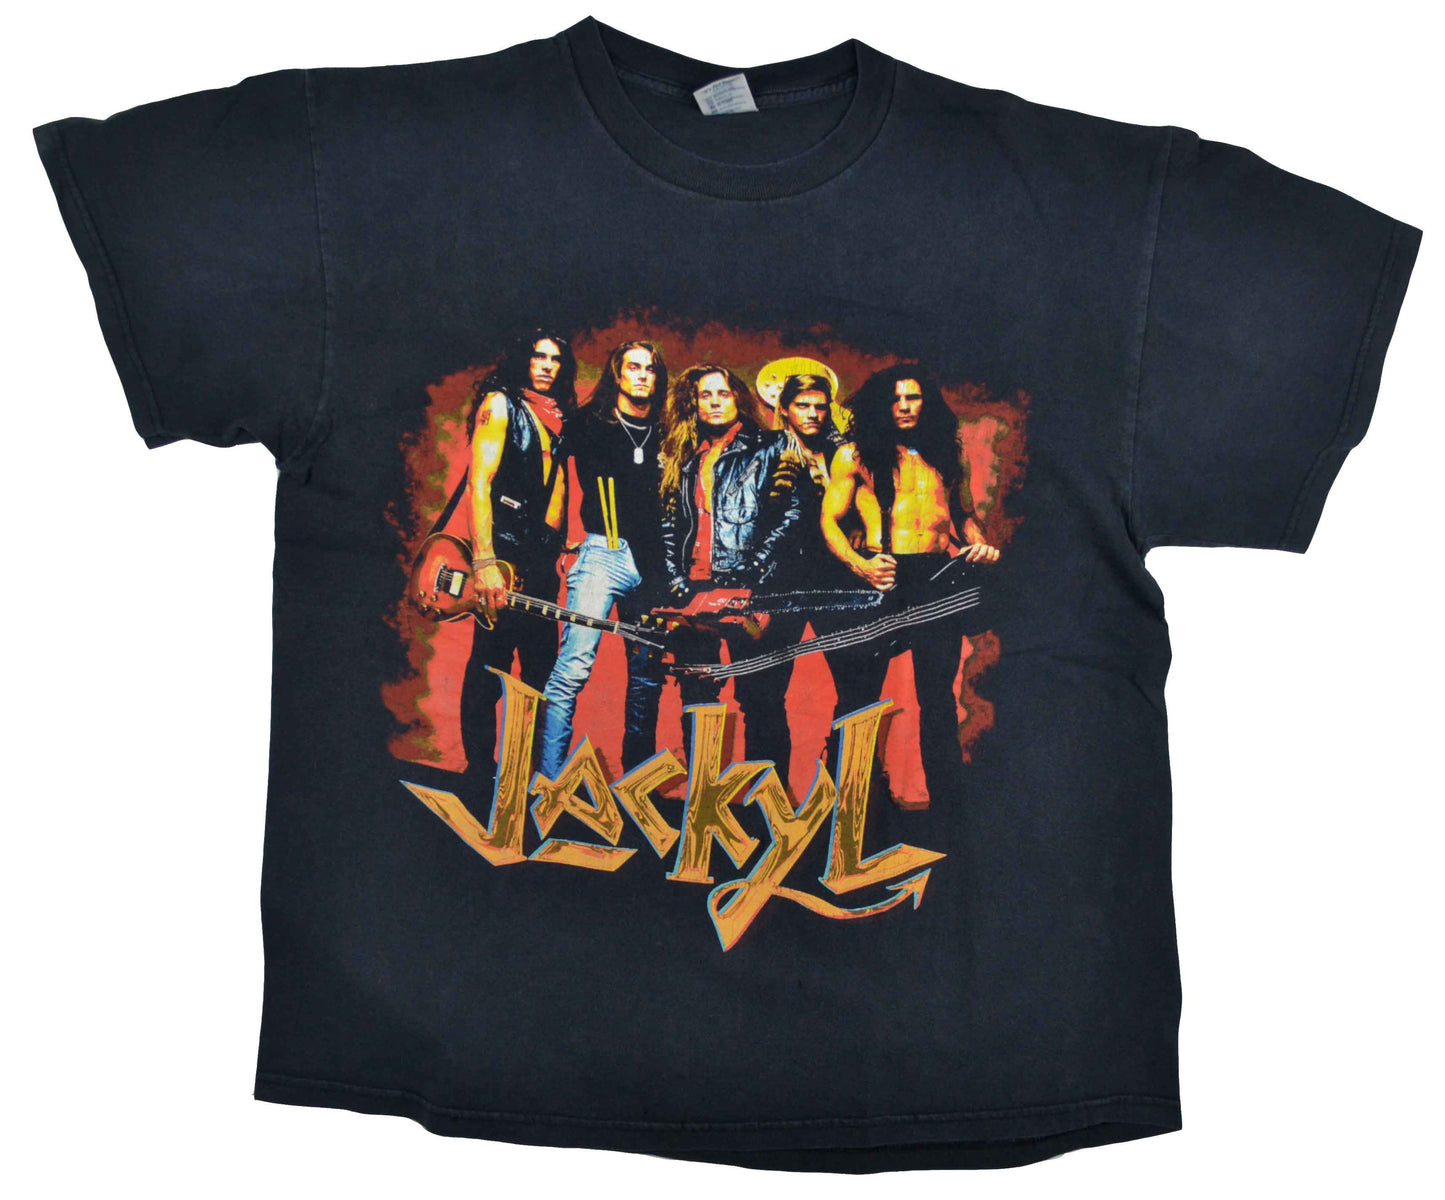 Vintage Band T-Shirt 1993 Jackyl "Rock Me Roll Me"  "I was born in the backwoods of a two-bit nowhere town". Do you remember what song this verse is from? If you are from the 90s surely yes. This is the first verse of the band's best known song, "The Lumberjack". The album that this song is part of, “Jackyl”, was certified Platinum in the US in 1992. The shirt presents an incredible look with minor retro damage.